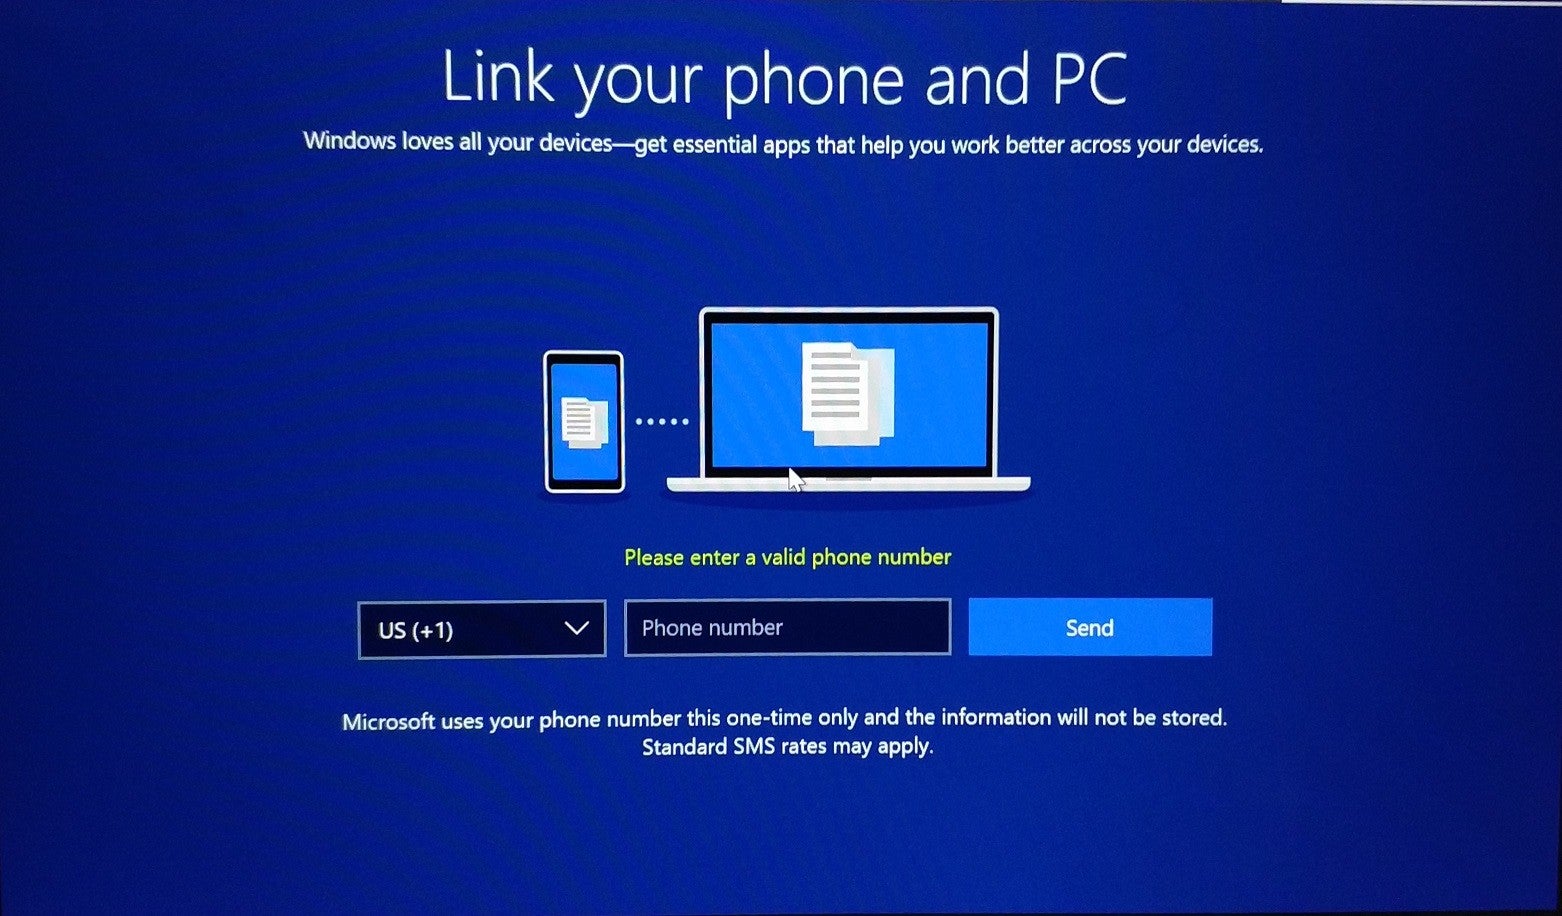 Windows 10 Build 17063 demands you turn over your mobile phone number before completing the installation - Microsoft demands your mobile number when setting up Windows 10 Build 17063